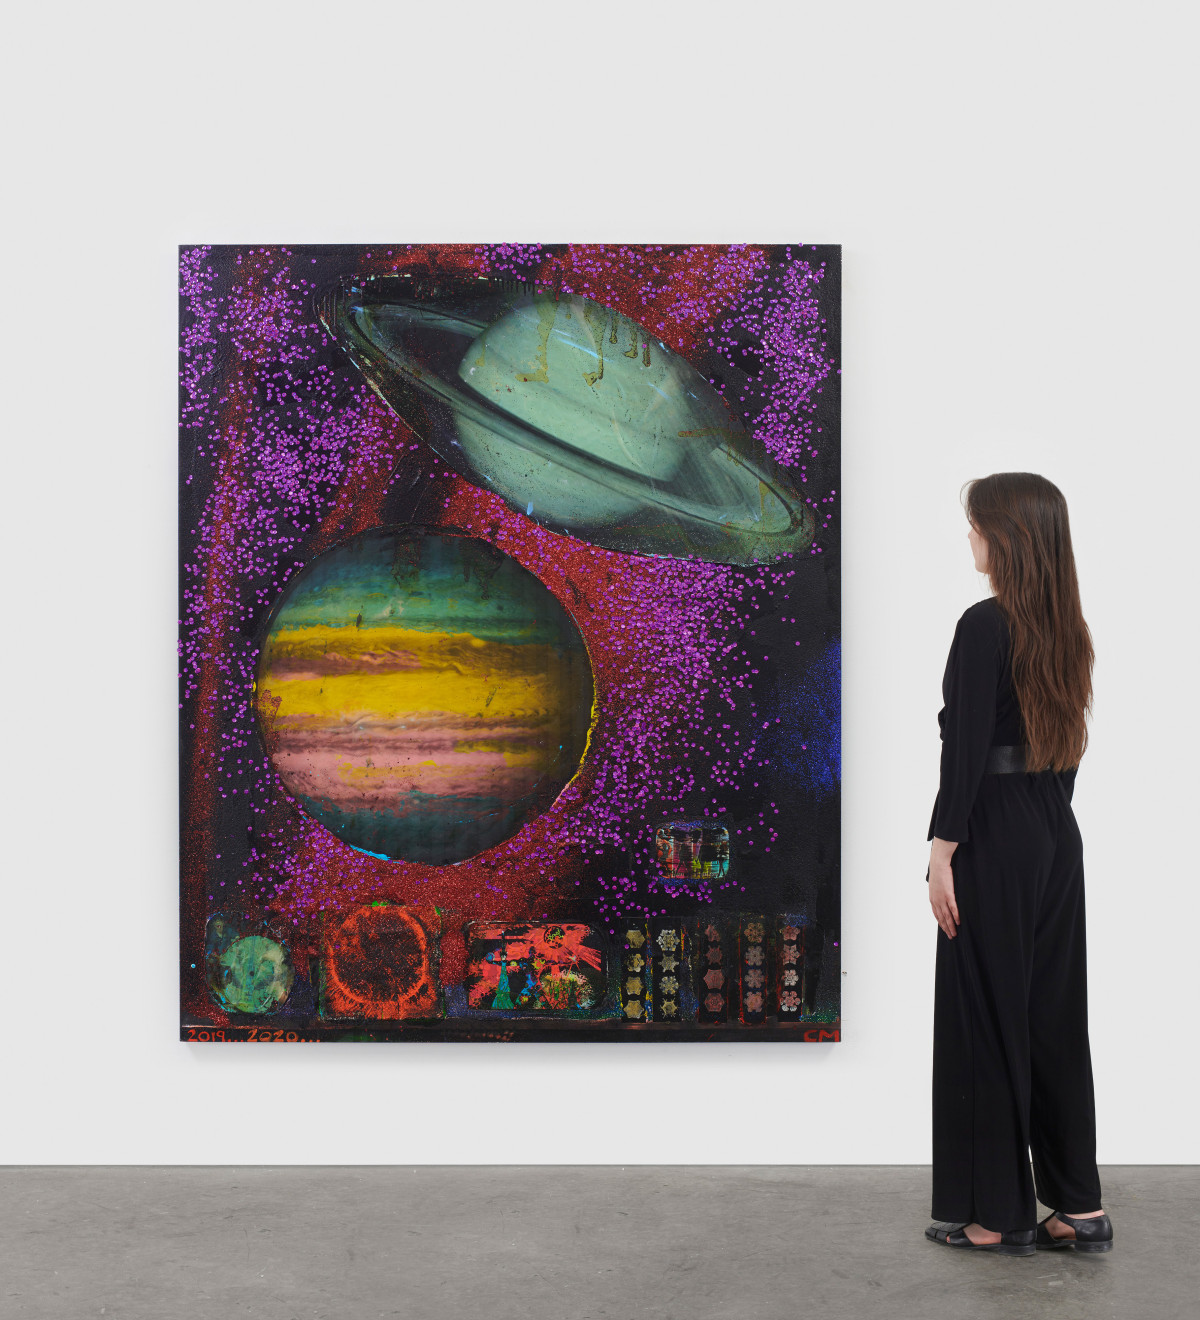 Chris Martin, Hot and Cold Planets, 2019 - 2020